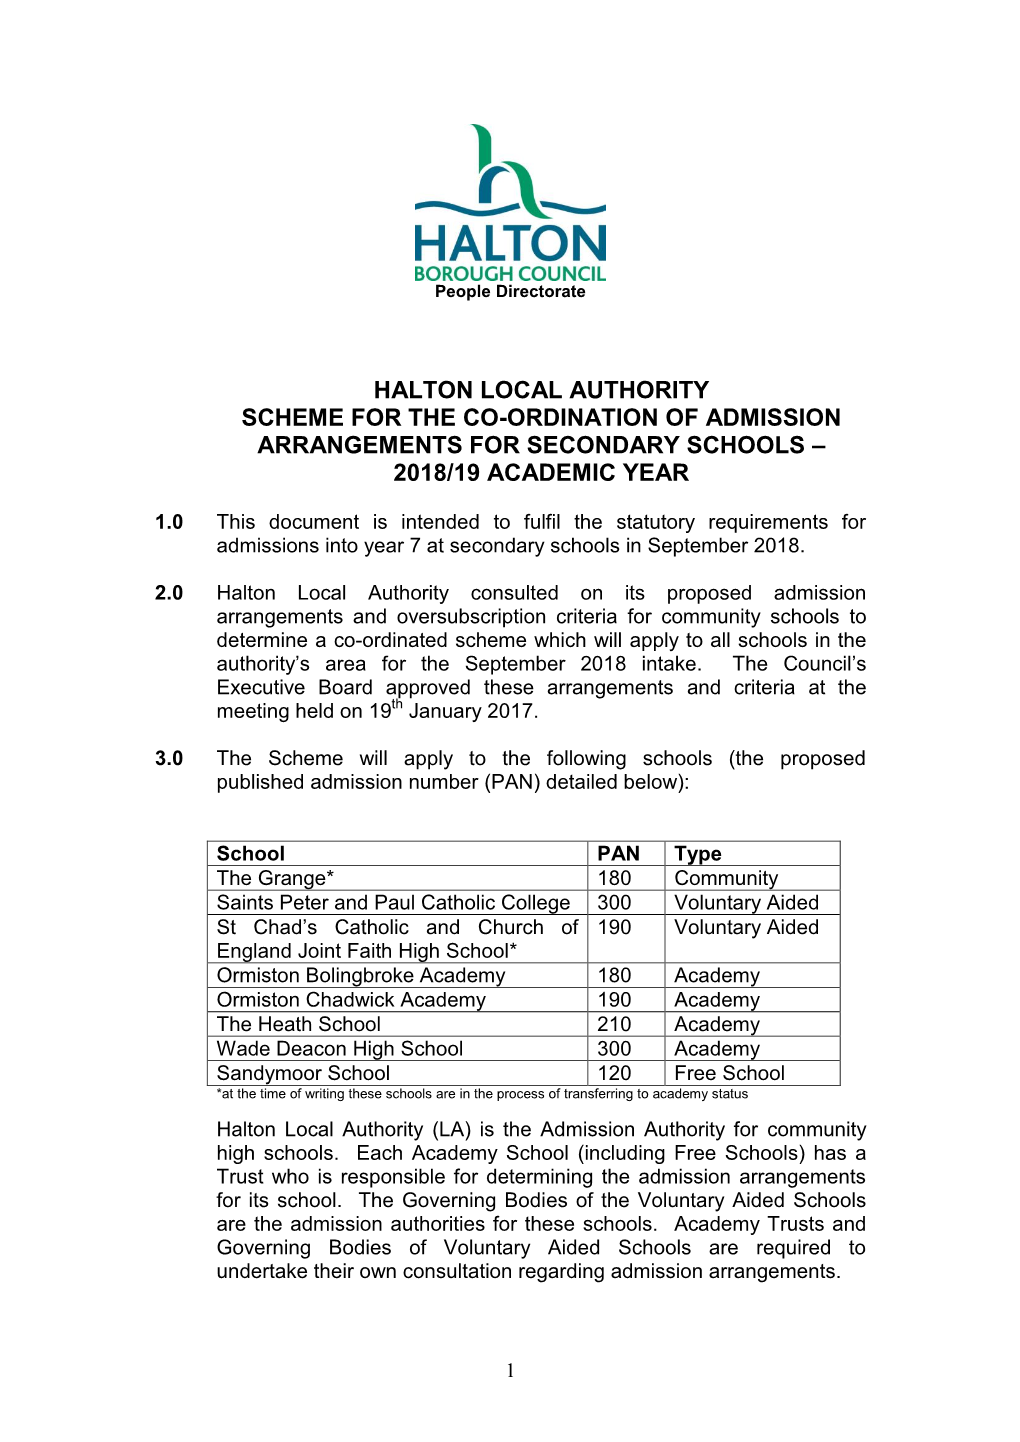 Halton Local Authority Scheme for the Co-Ordination of Admission Arrangements for Secondary Schools – 2018/19 Academic Year